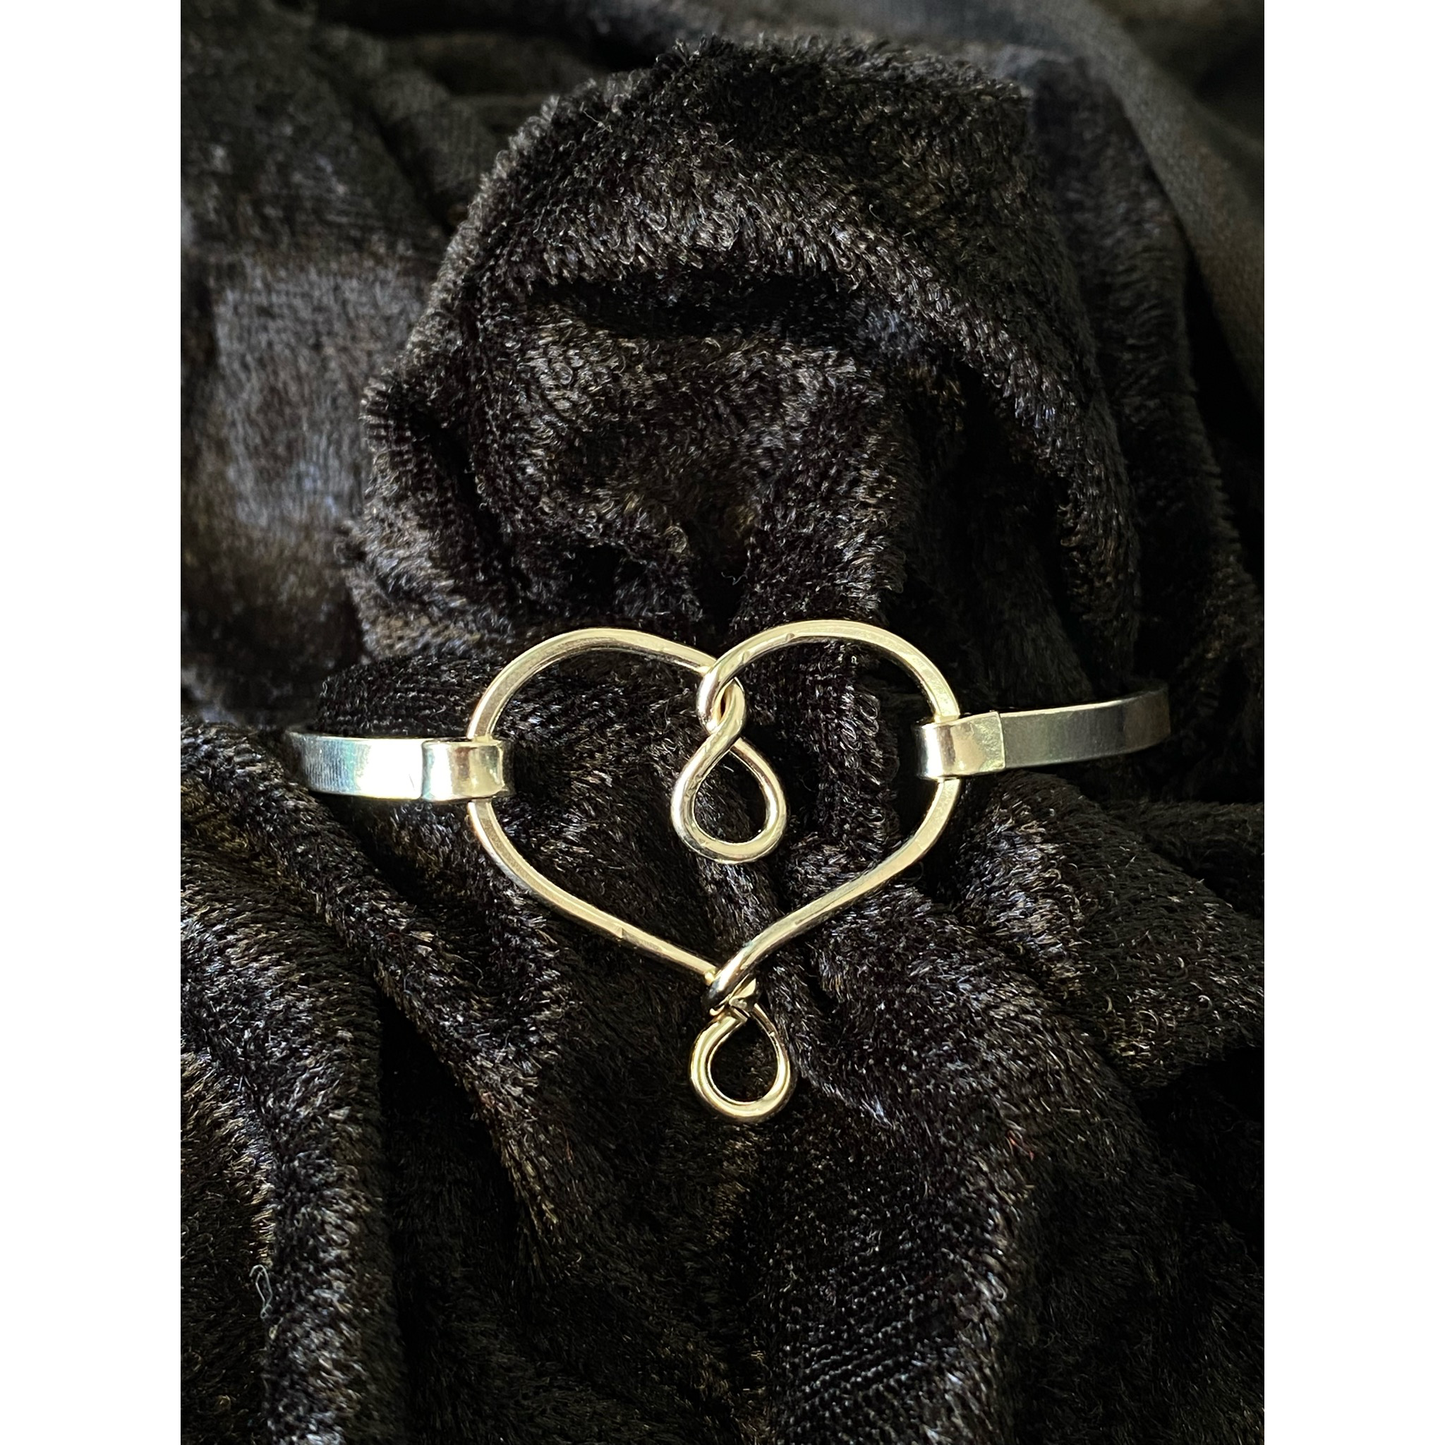 LCDVI Twisted Heart Bangle (2144)